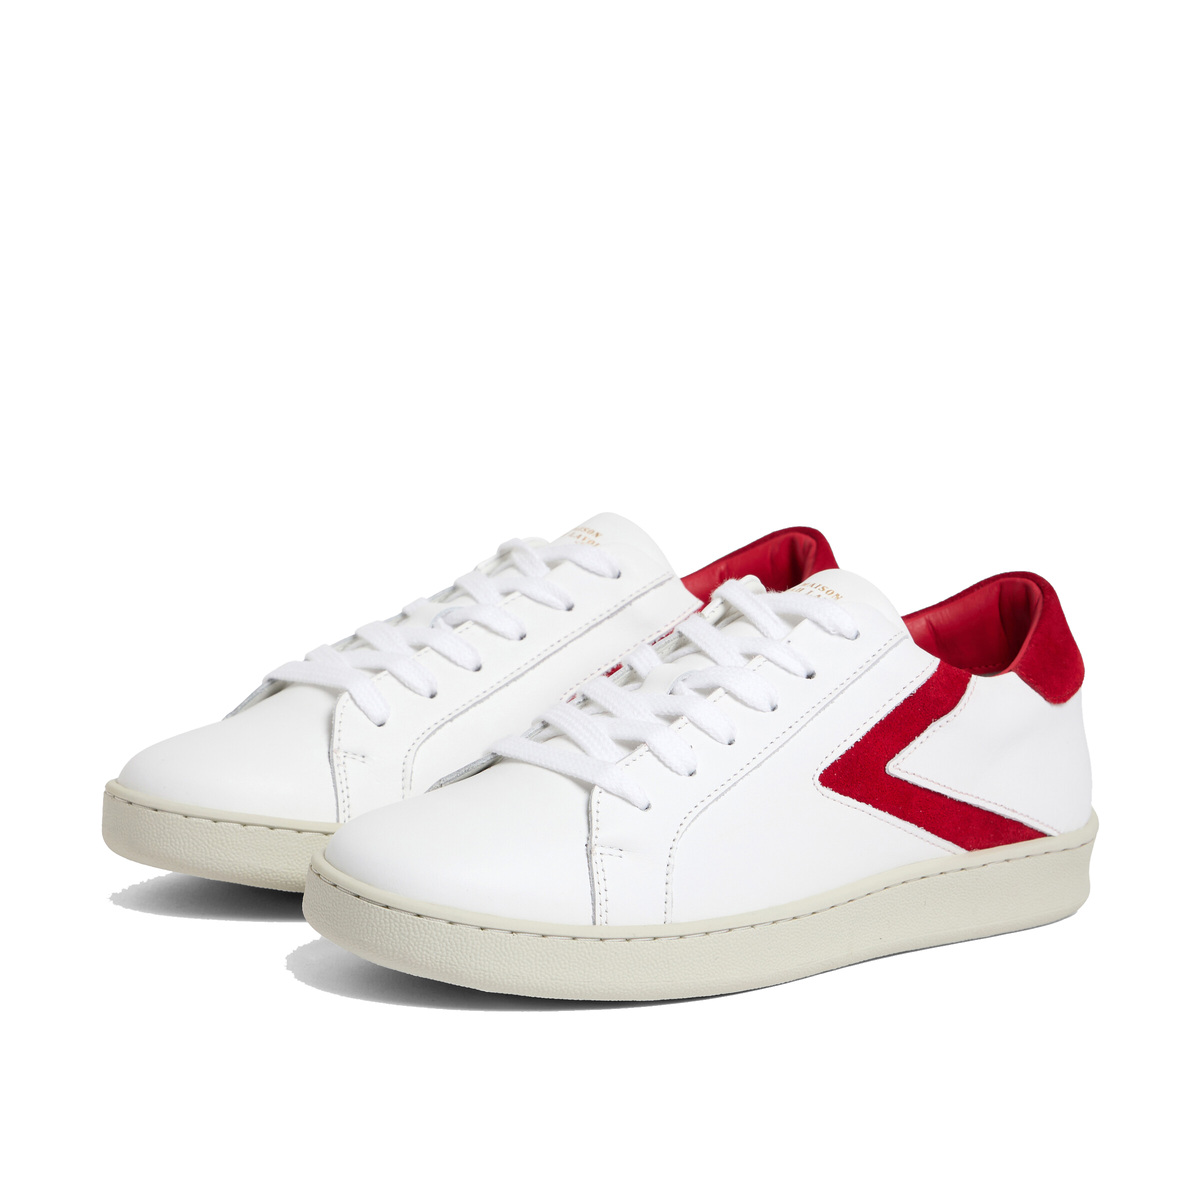 Sneakers Claudia, White / Red - Comfort footbed - Leather / Suede - image 1